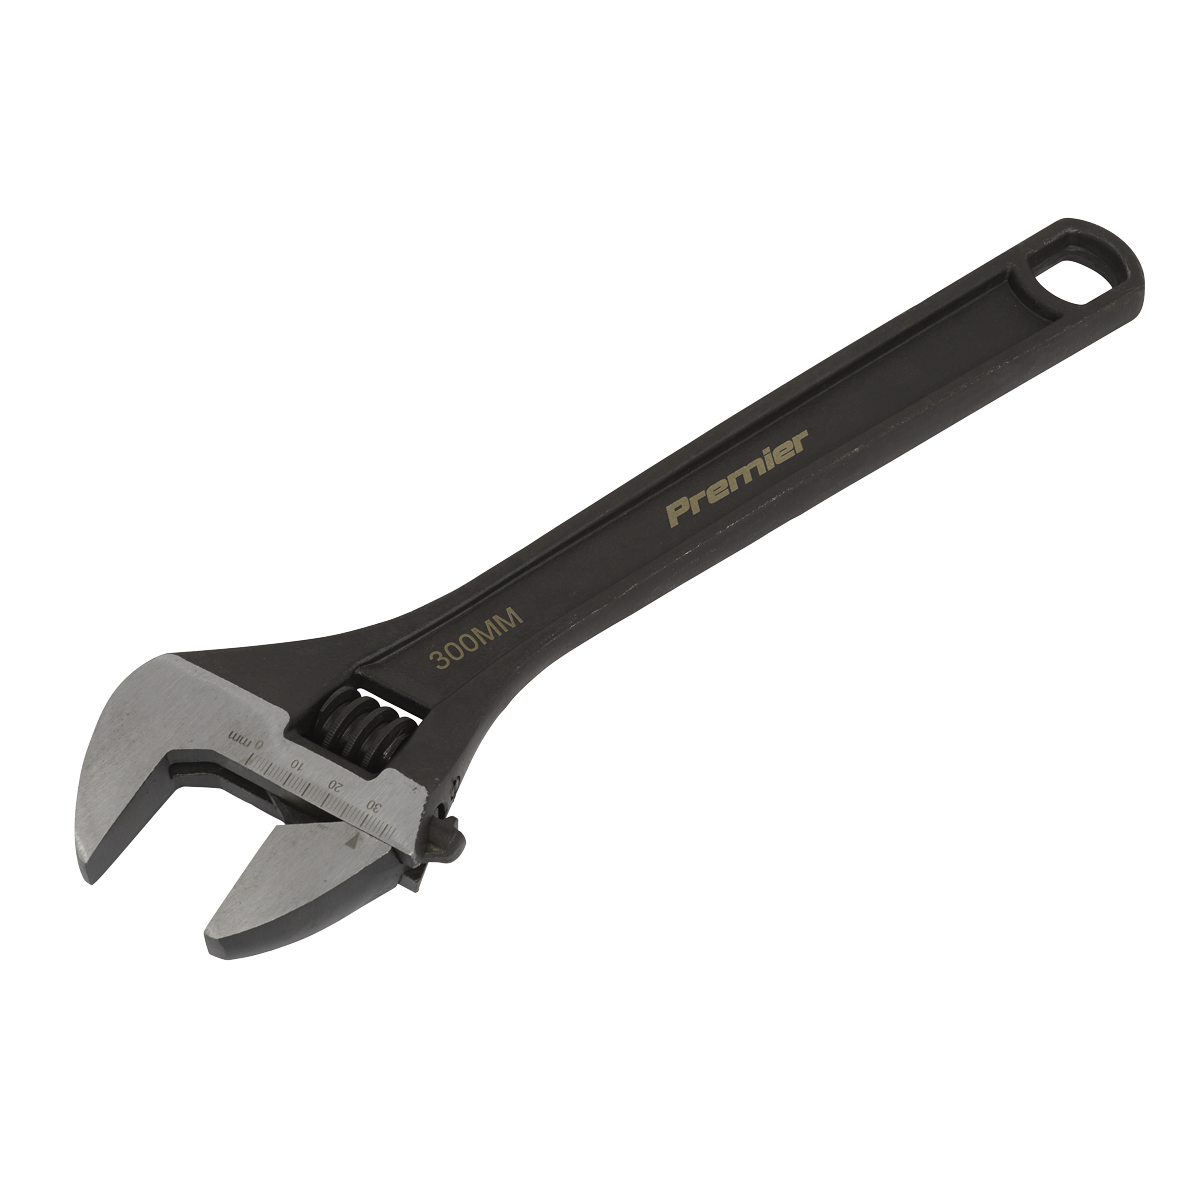 Adjustable Wrench 300mm - AK9563 - Farming Parts